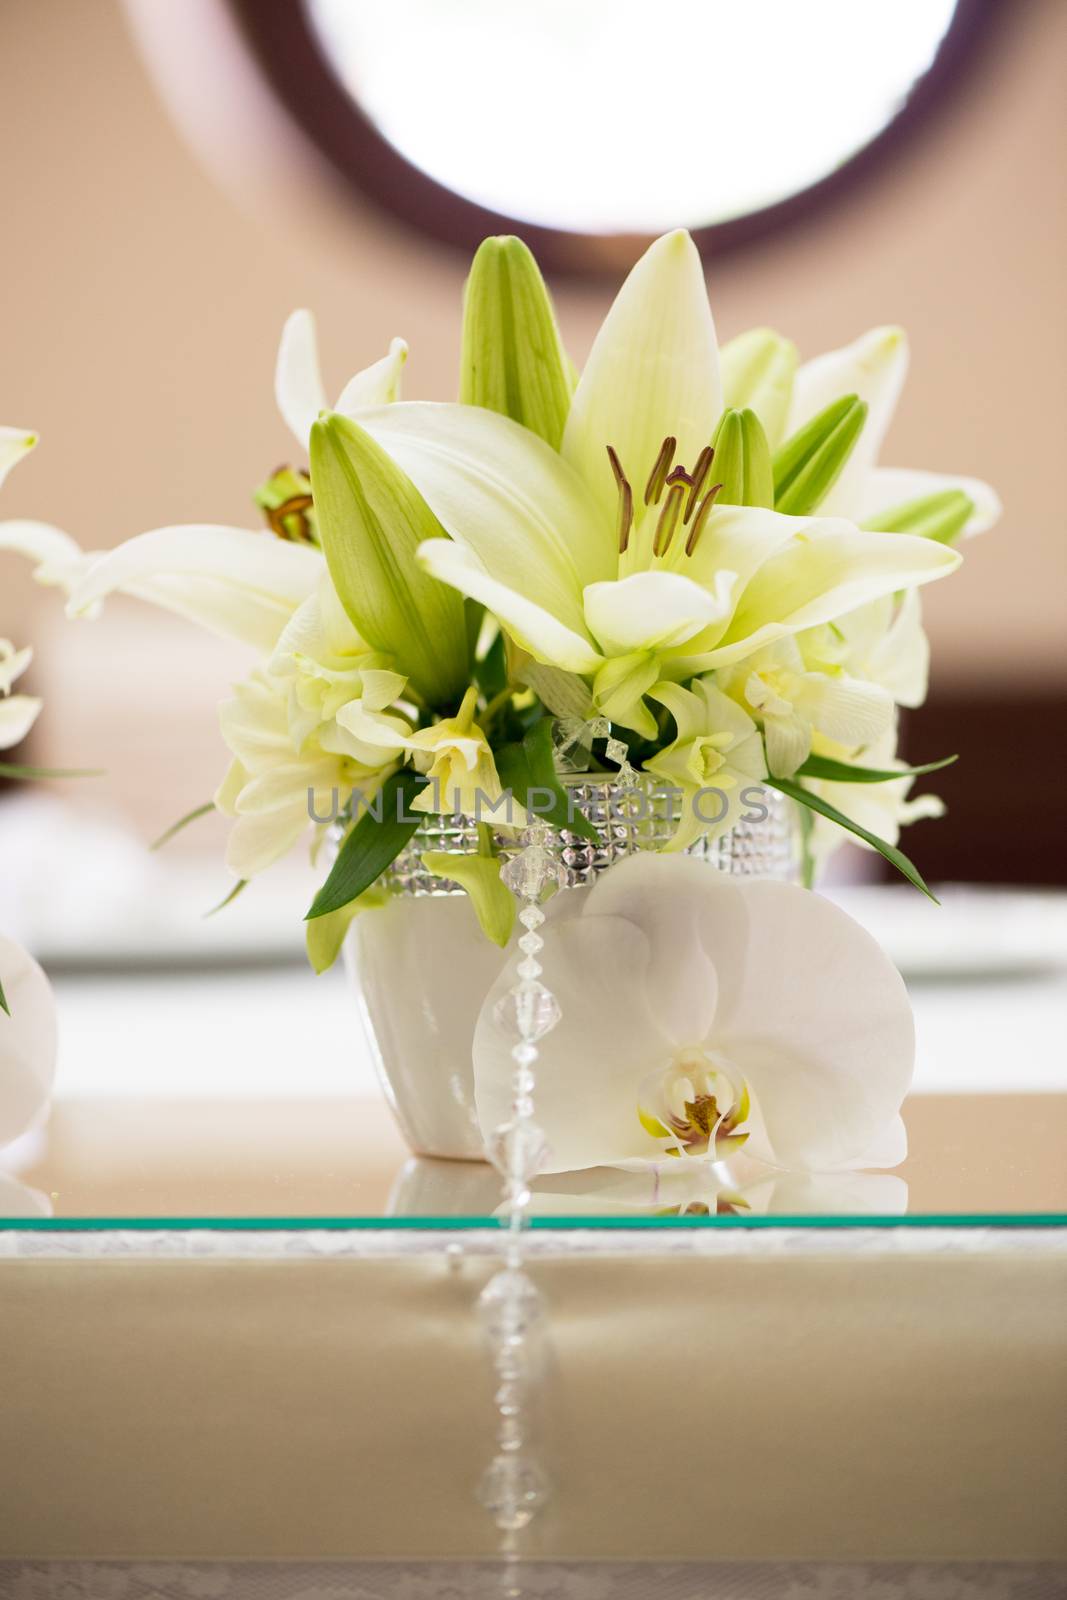 Wedding table decoration with lily